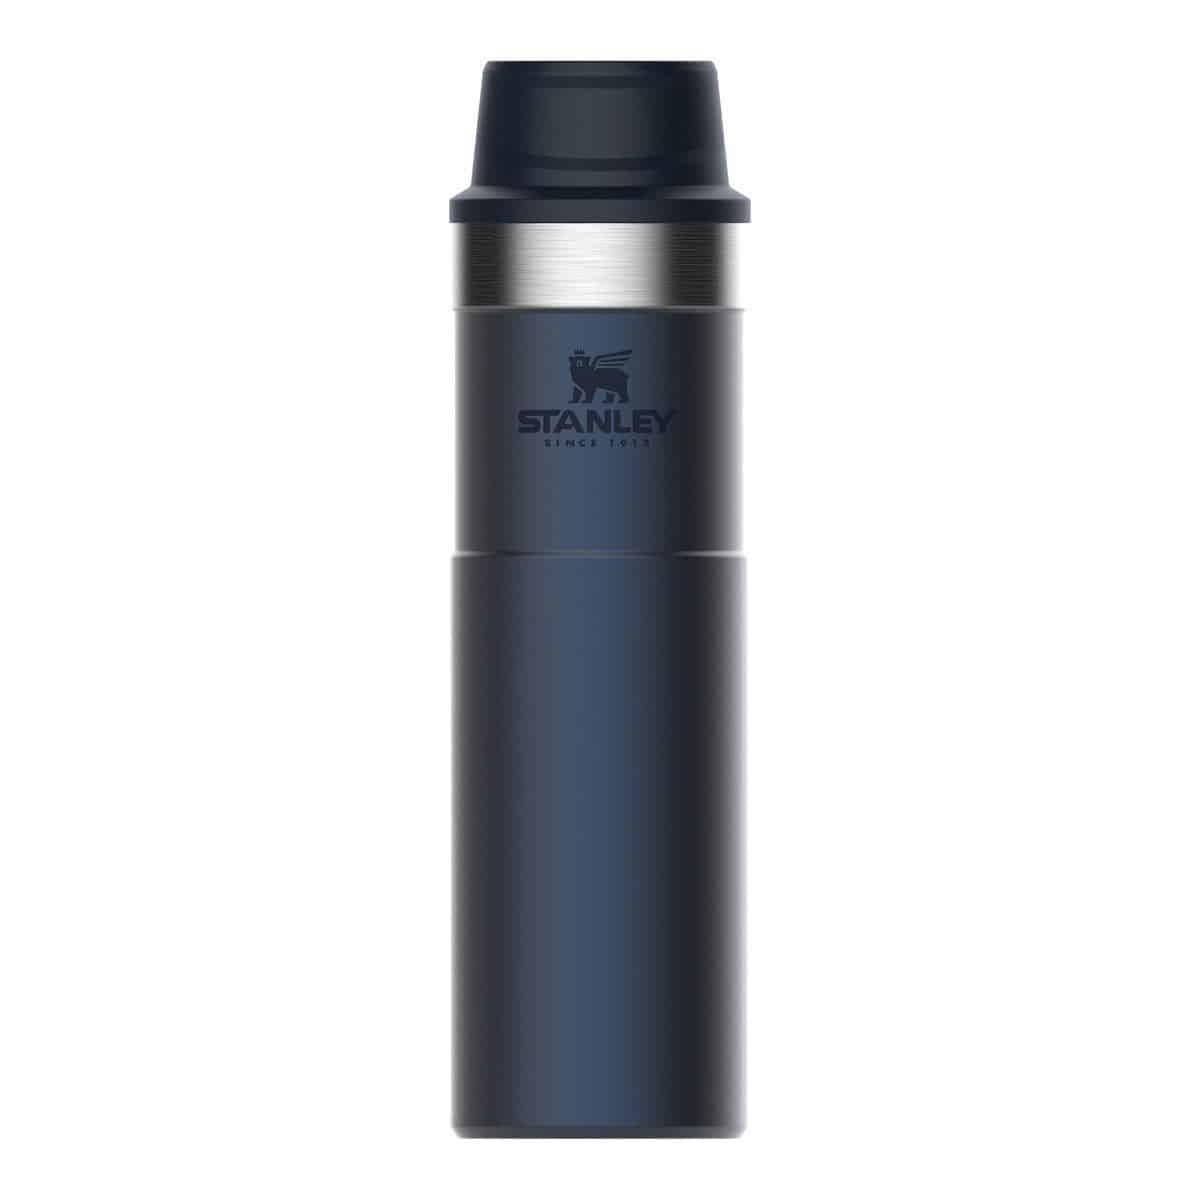 A Stanley travel thermos made of stainless steel is shown on a white background.